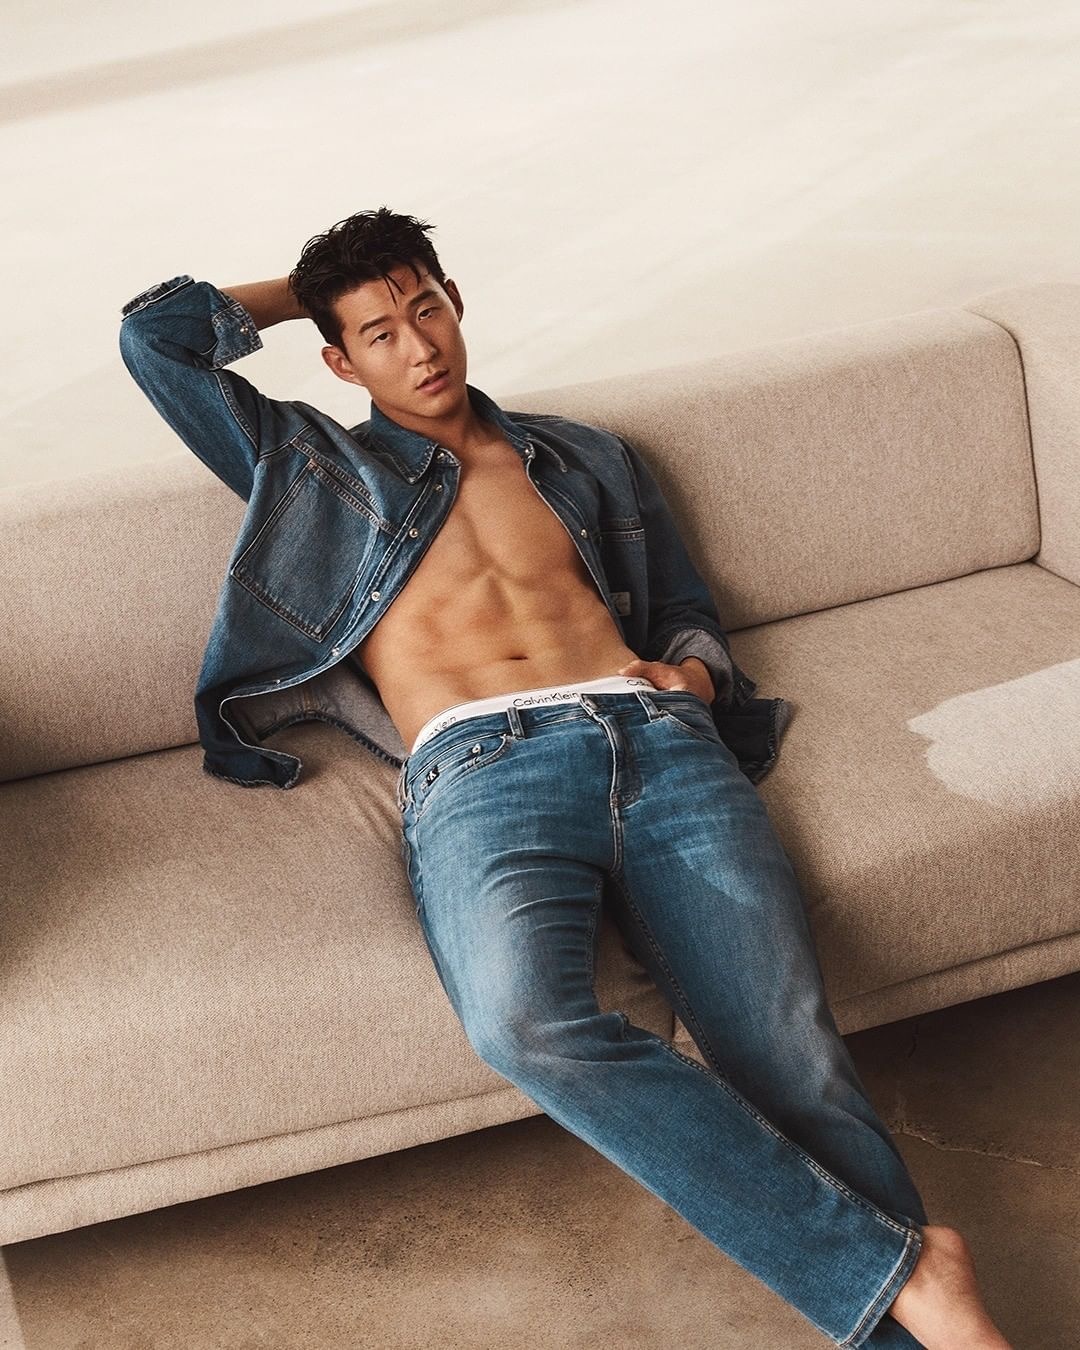 Son Heung-min shows off ripped body in just his pants for steamy